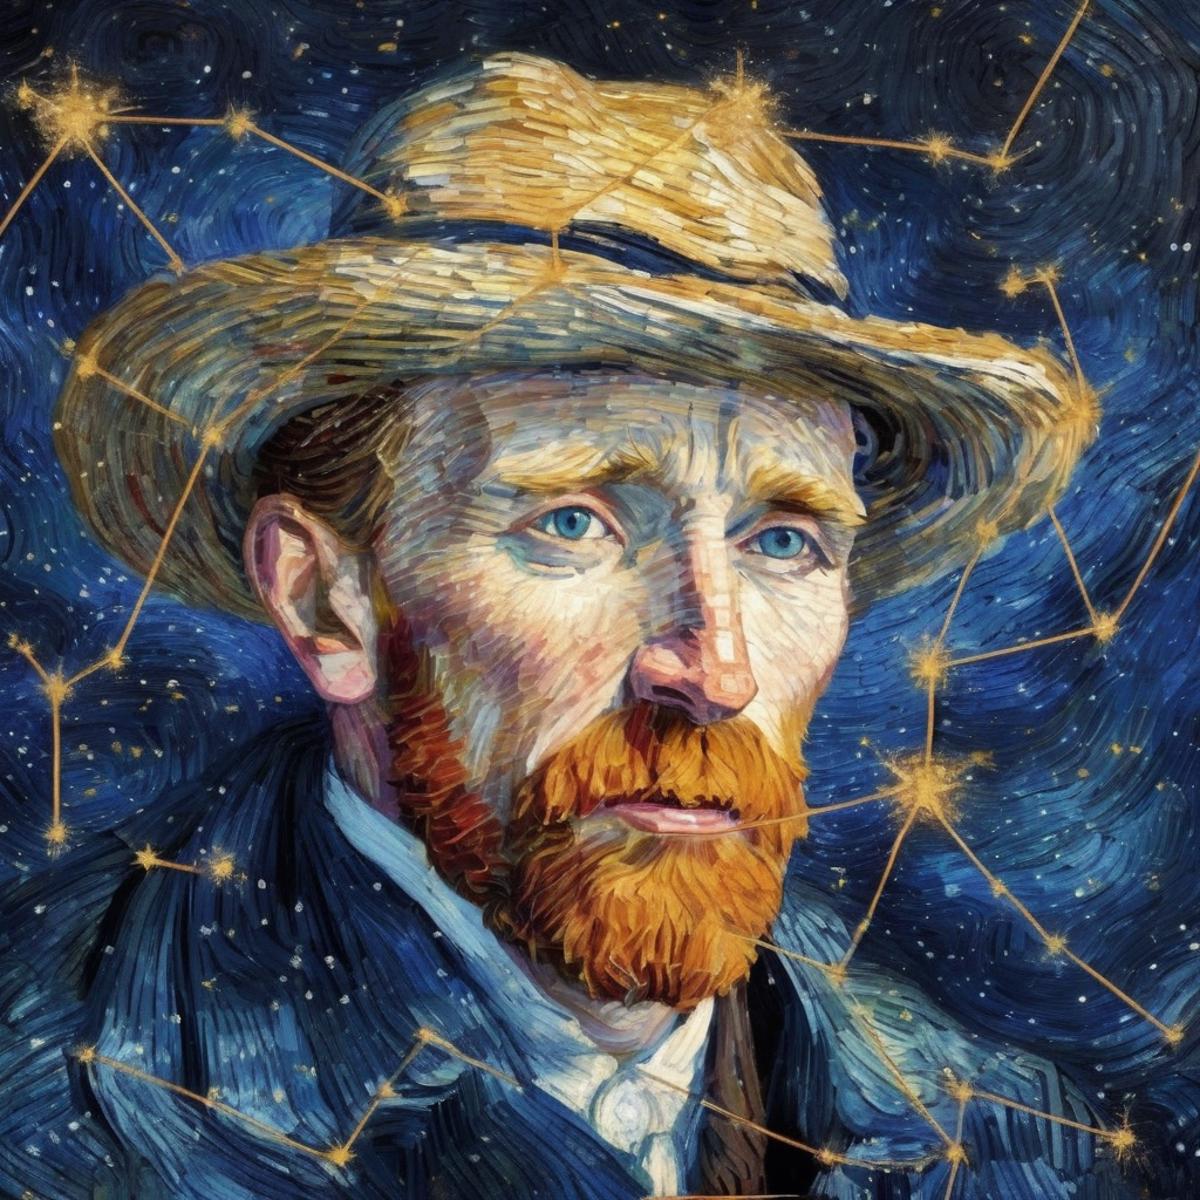 A man with a beard and hat, painted in a Van Gogh style, with a blue background and stars in the background.